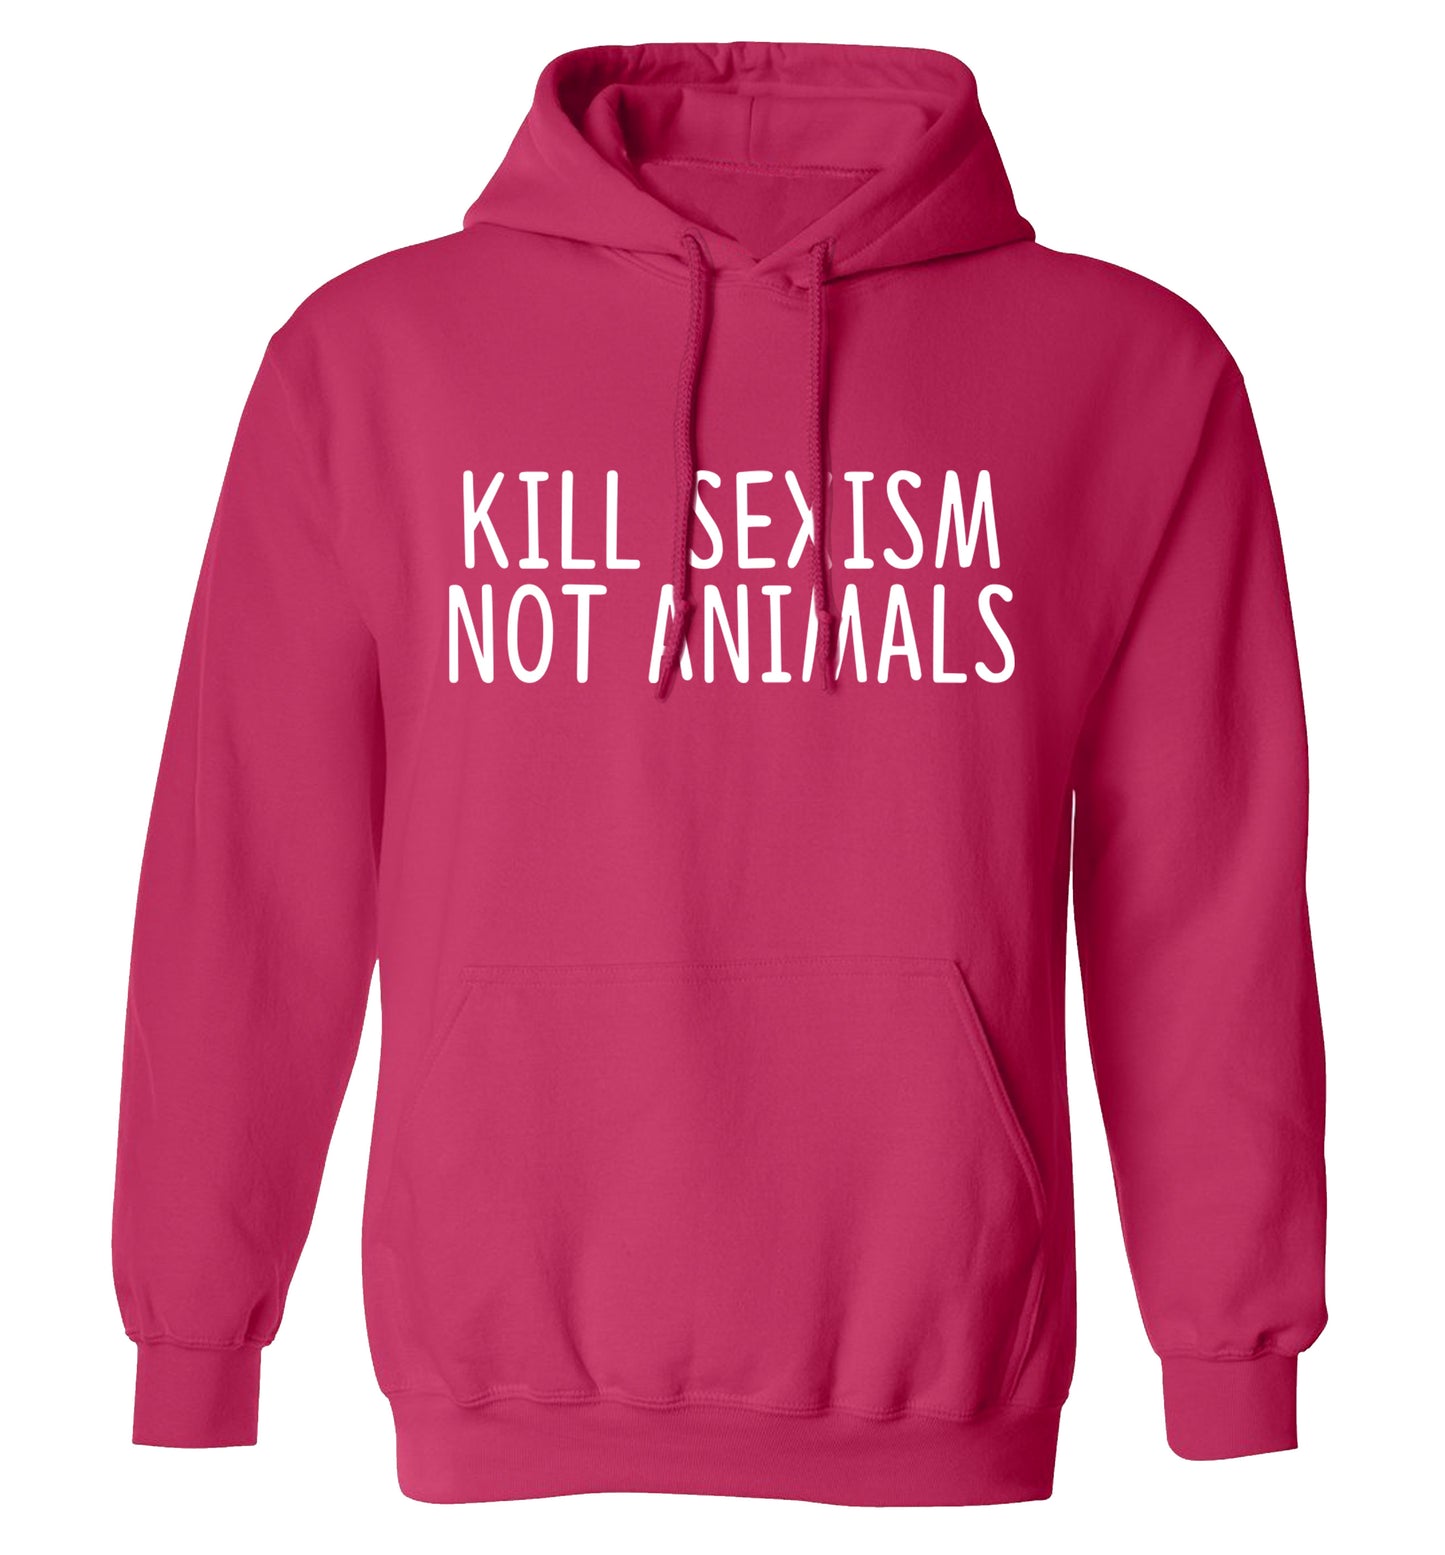 Kill Sexism Not Animals adults unisex pink hoodie 2XL